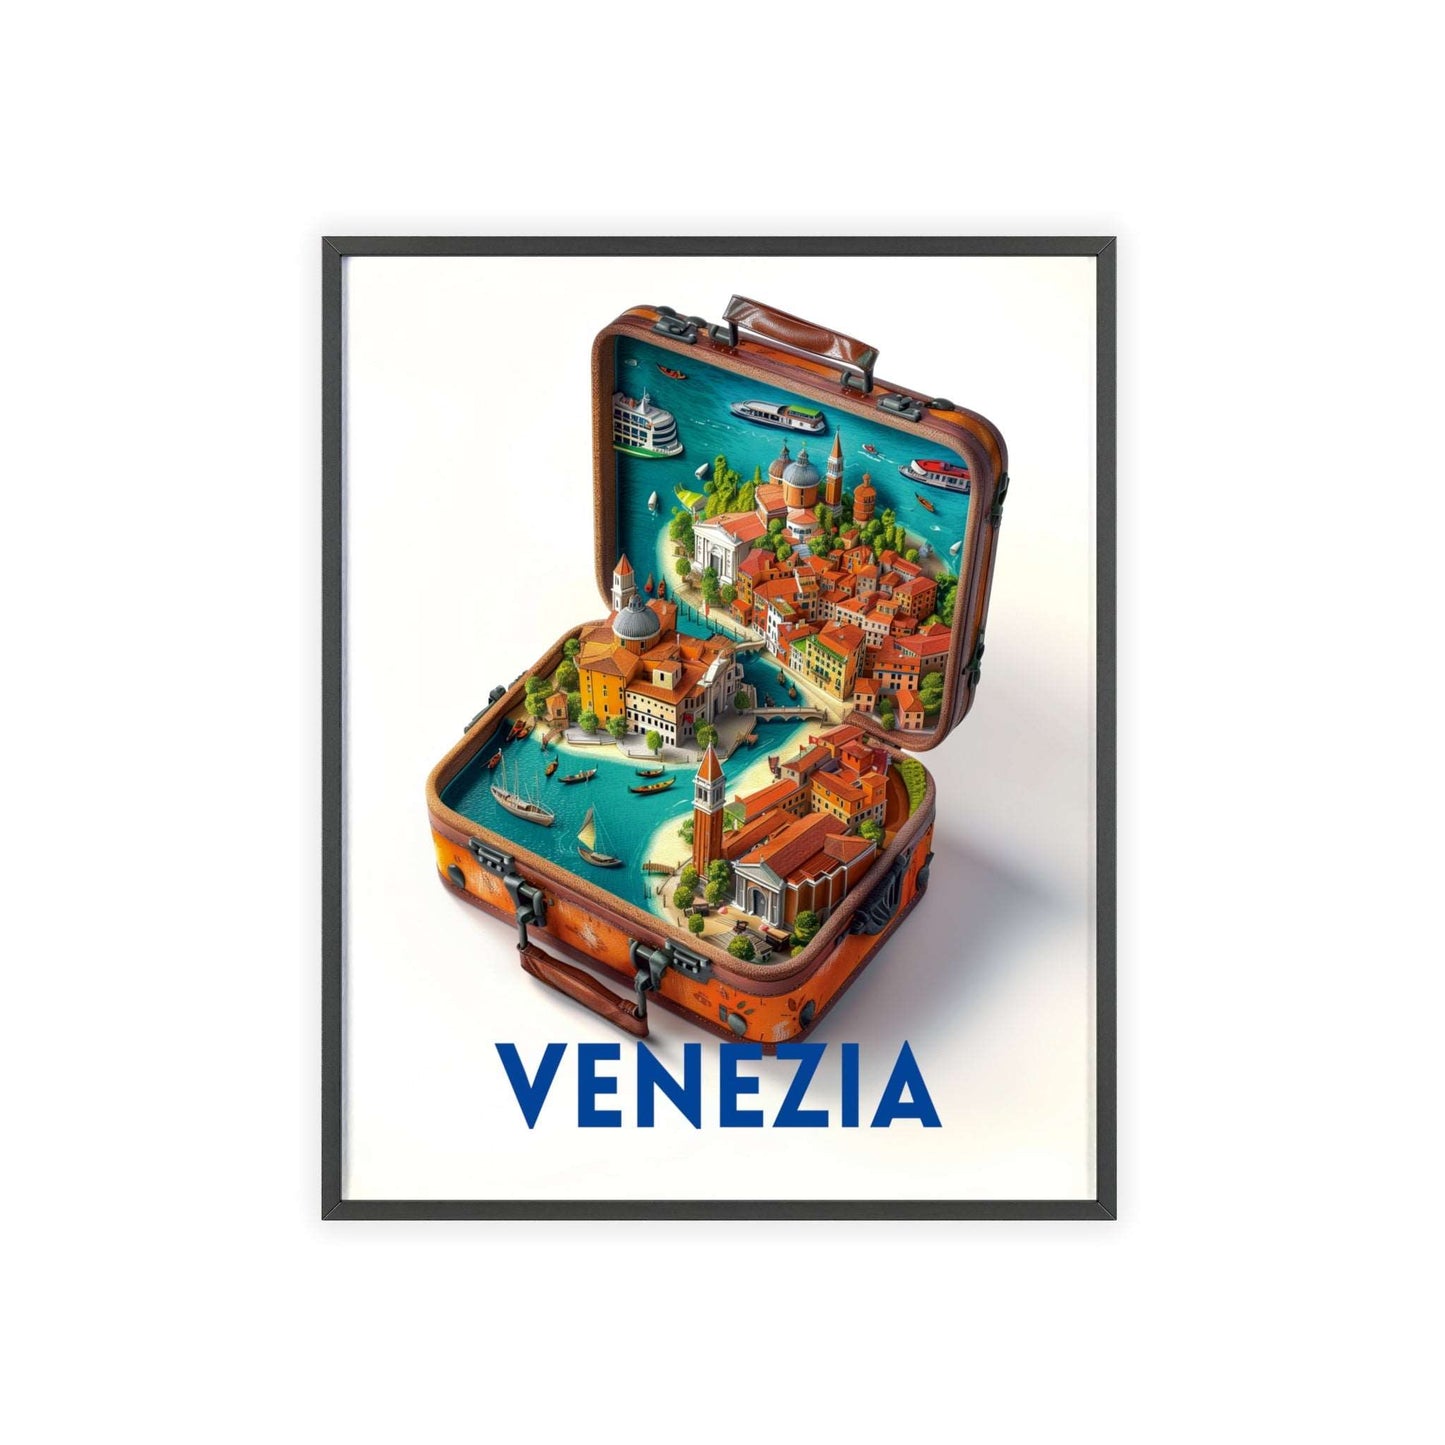 Venice in a Suitcase wall art, a chic travel poster for elegant home decor